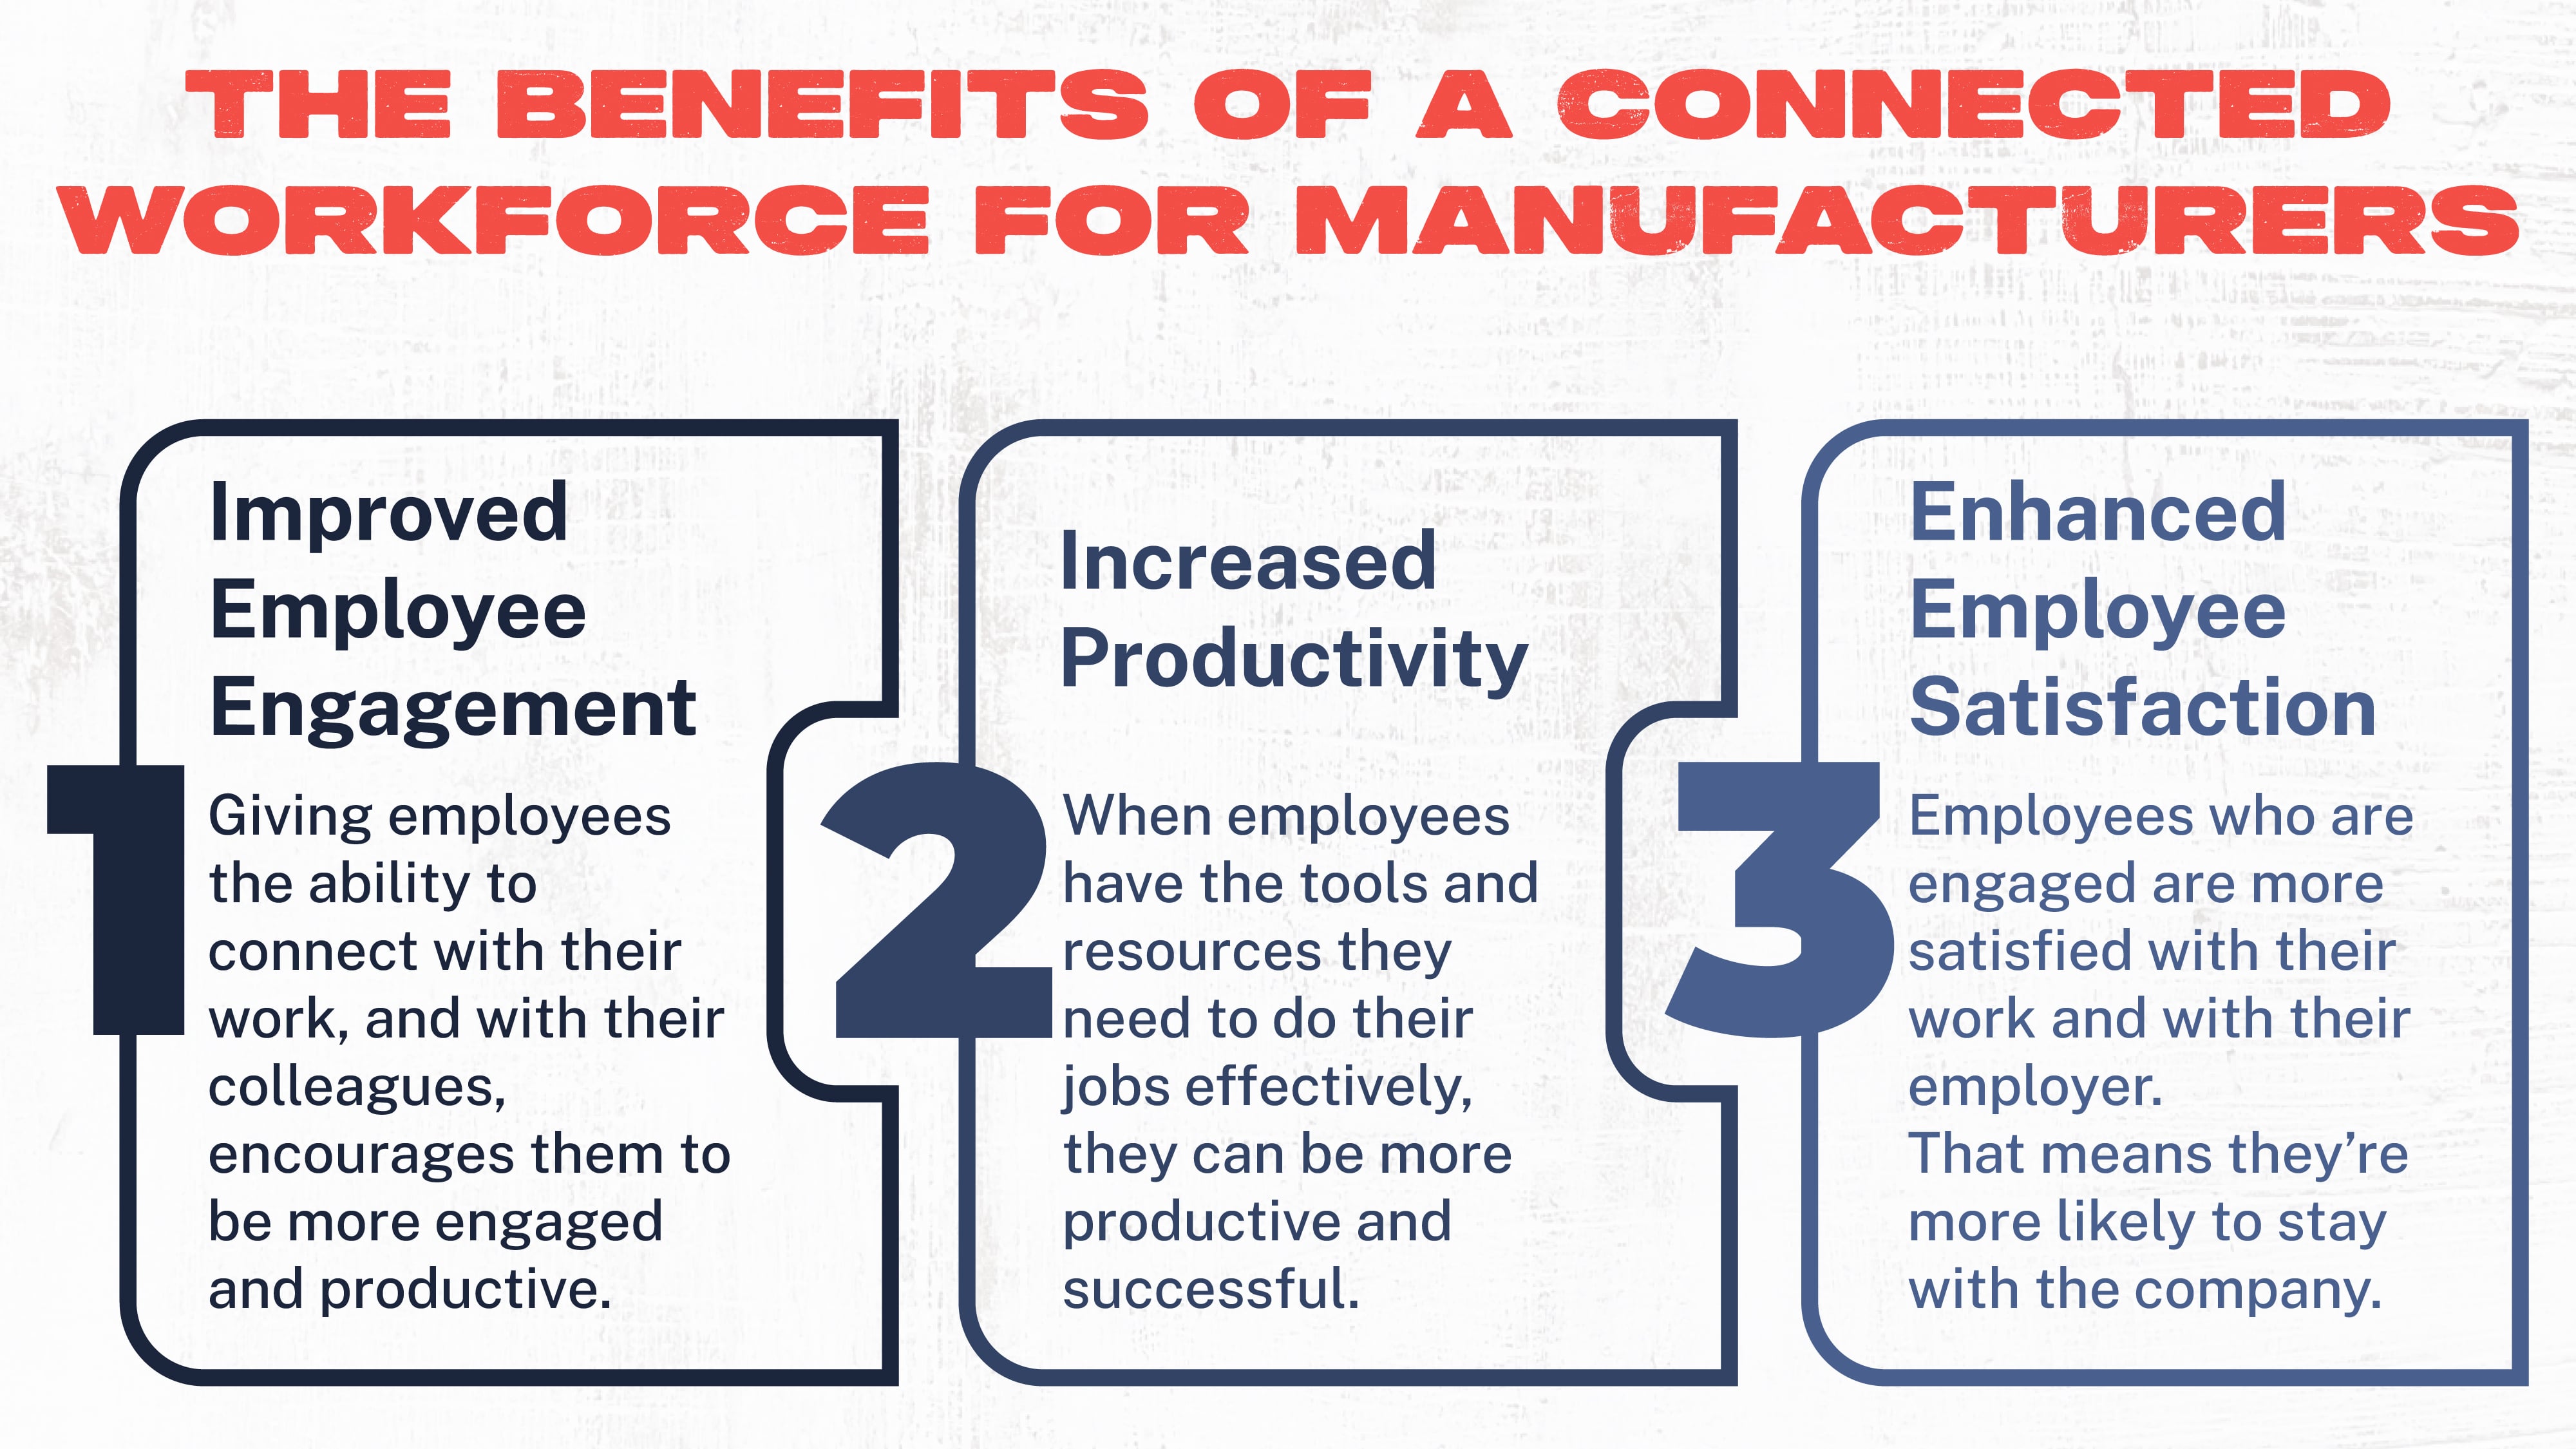 Benefits of a Connected Workforce for Manufacturers